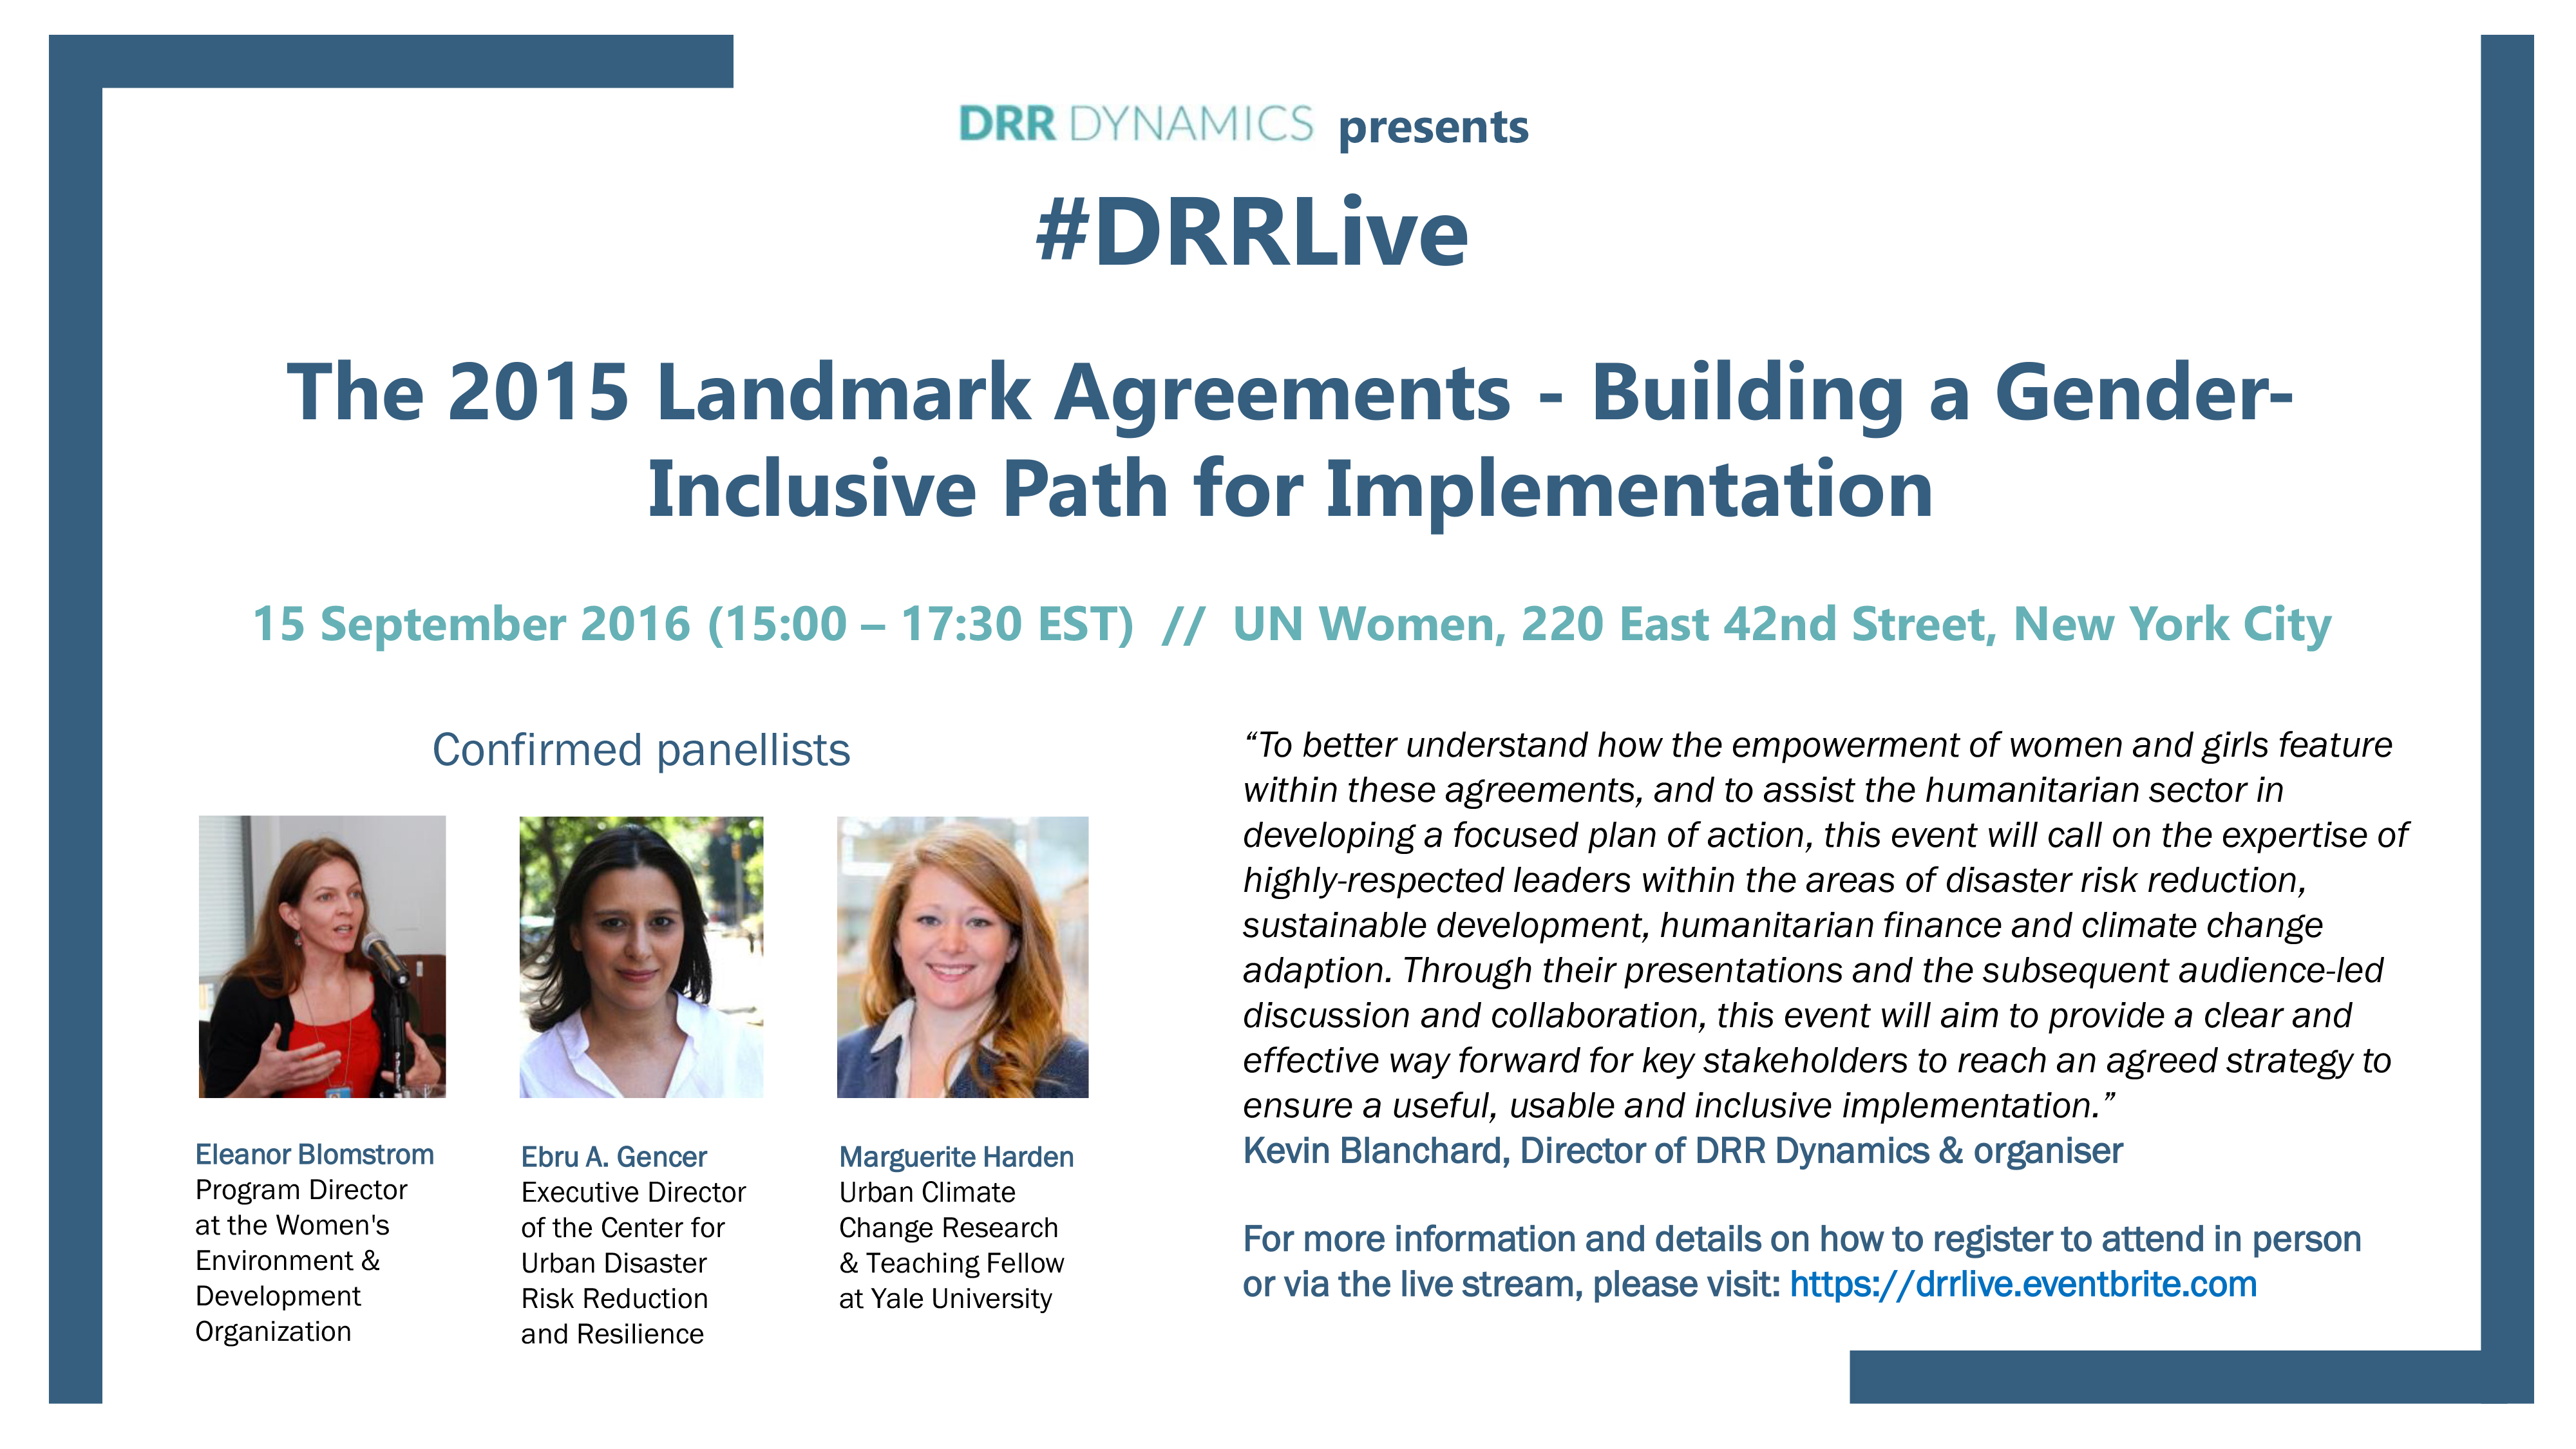 CUDRR+R presents at the #DRRLive Conference: The 2015 Landmark Agreements – Building a Gender-Inclusive Path for Implementation